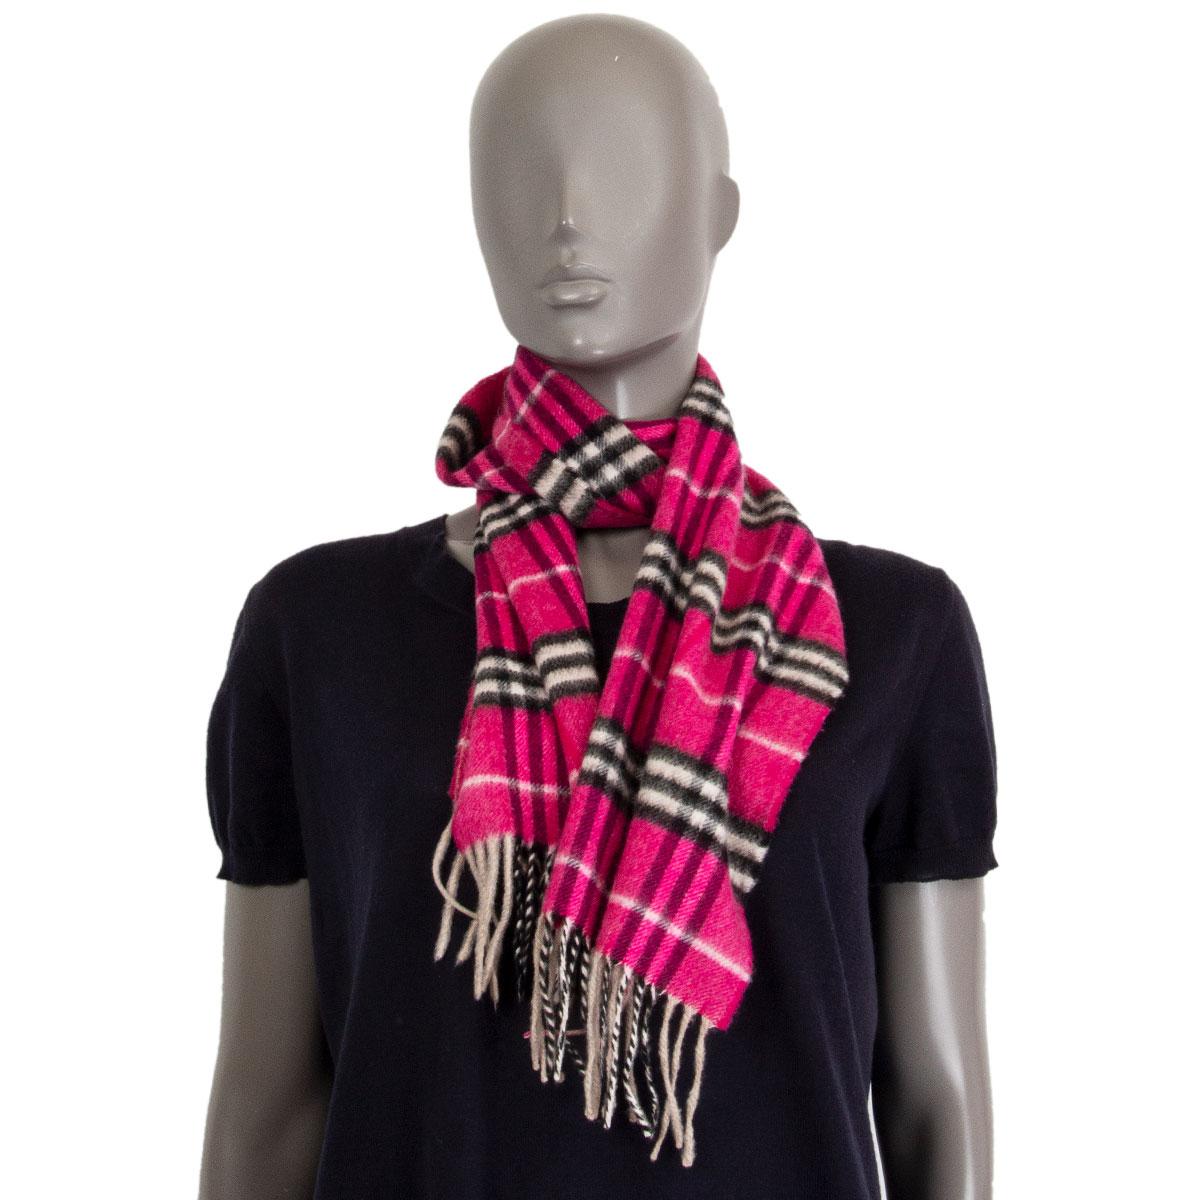 100% authentic Burberry Classic slim check shawl in pink, dirty pale rose and black cashmere (100%). Has been worn and is in excellent condition. 

Width 20.5cm (8in)
Length 128cm (49.9in)

All our listings include only the listed item unless